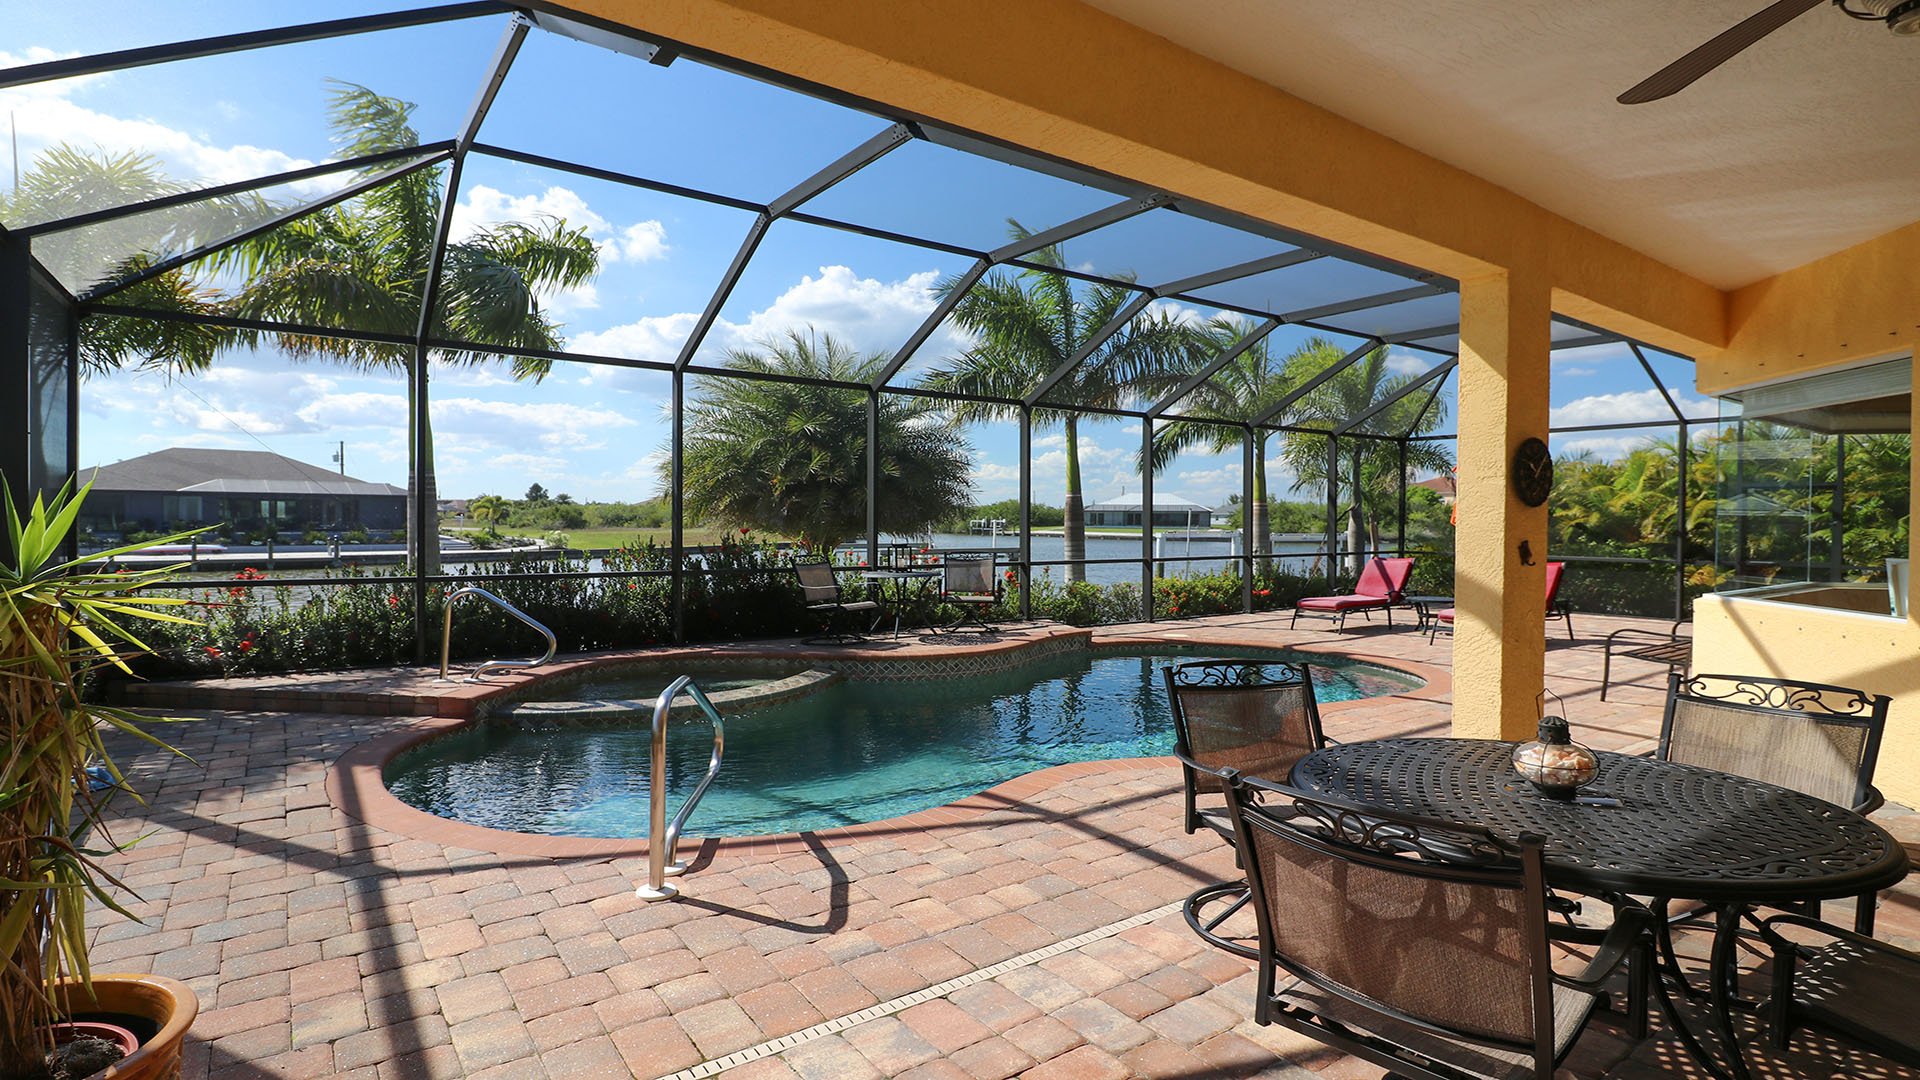 Gorgeous lanai with covered patio area with dining overlooking the pool and canal beyond